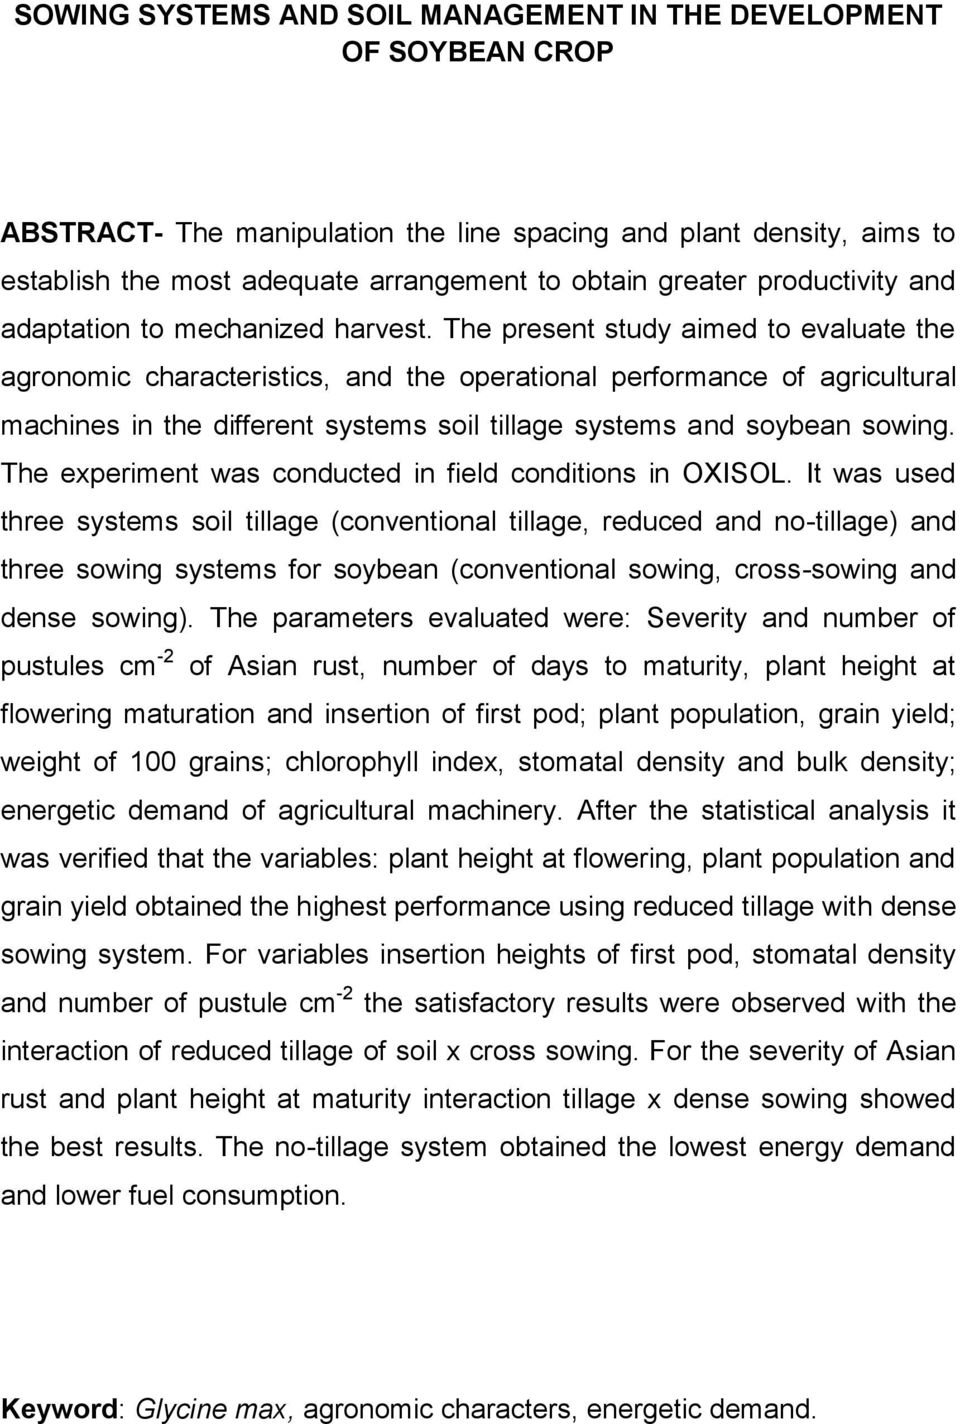 The present study aimed to evaluate the agronomic characteristics, and the operational performance of agricultural machines in the different systems soil tillage systems and soybean sowing.